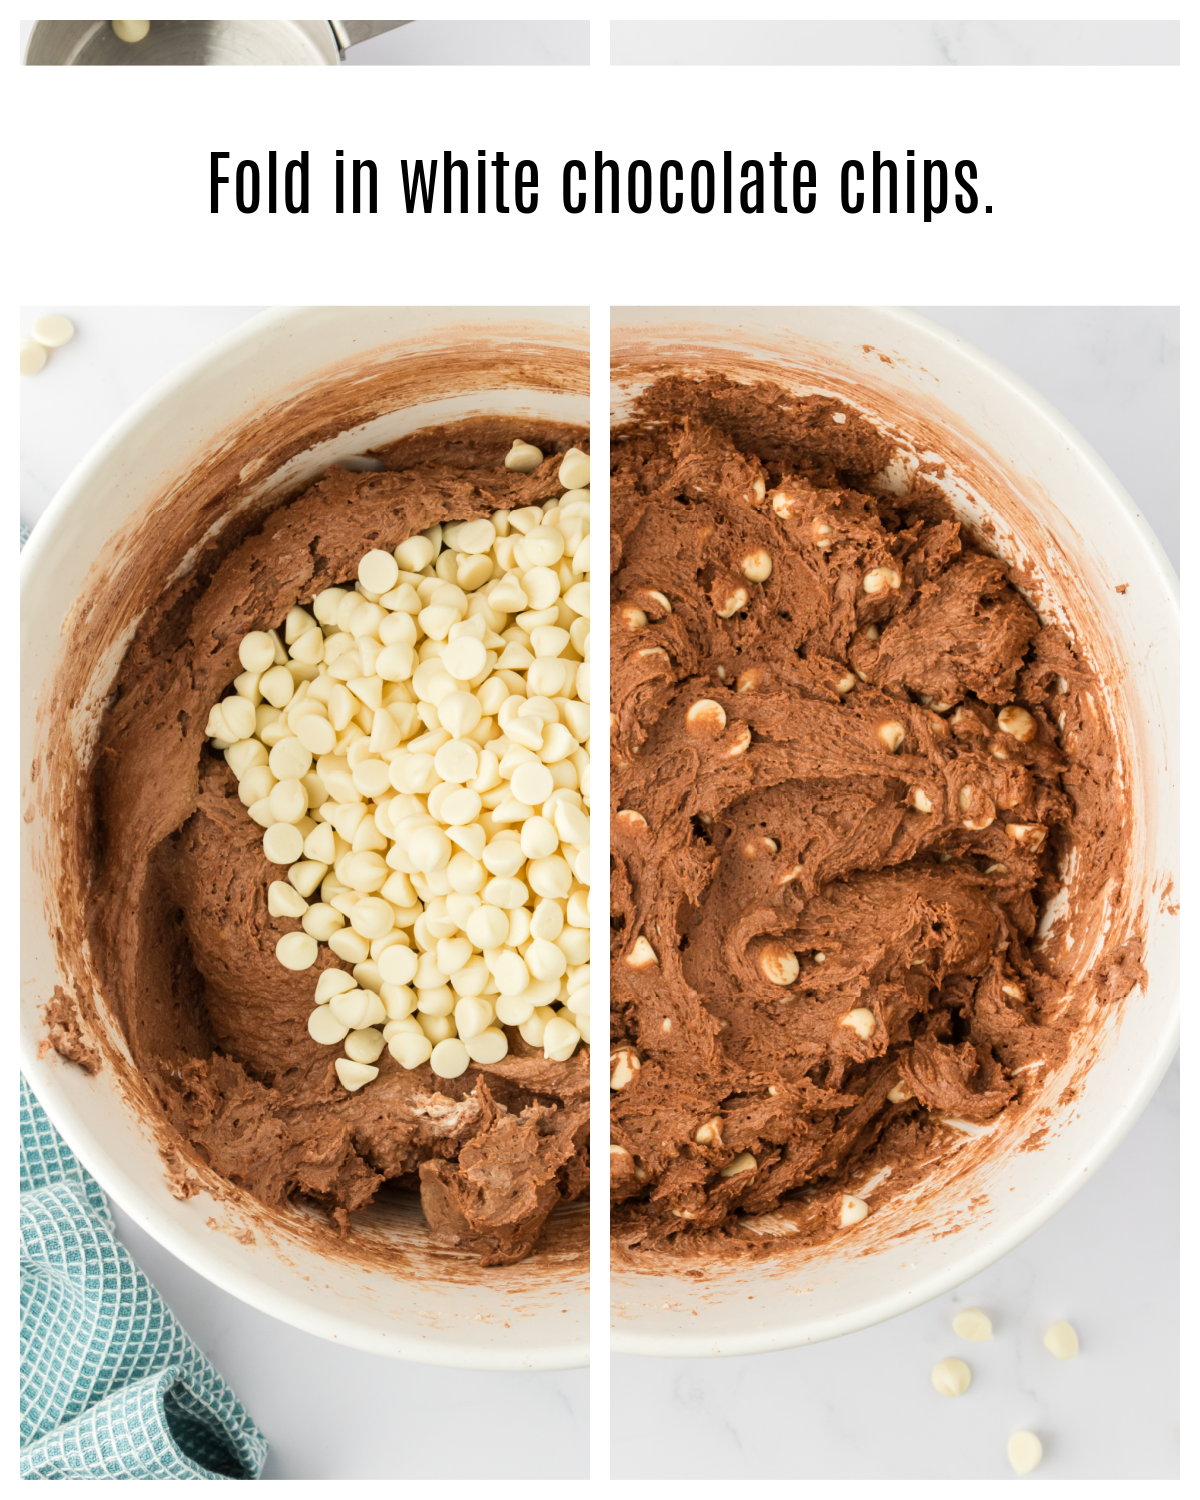 white chocolate chips folded into chocolate cookie dough